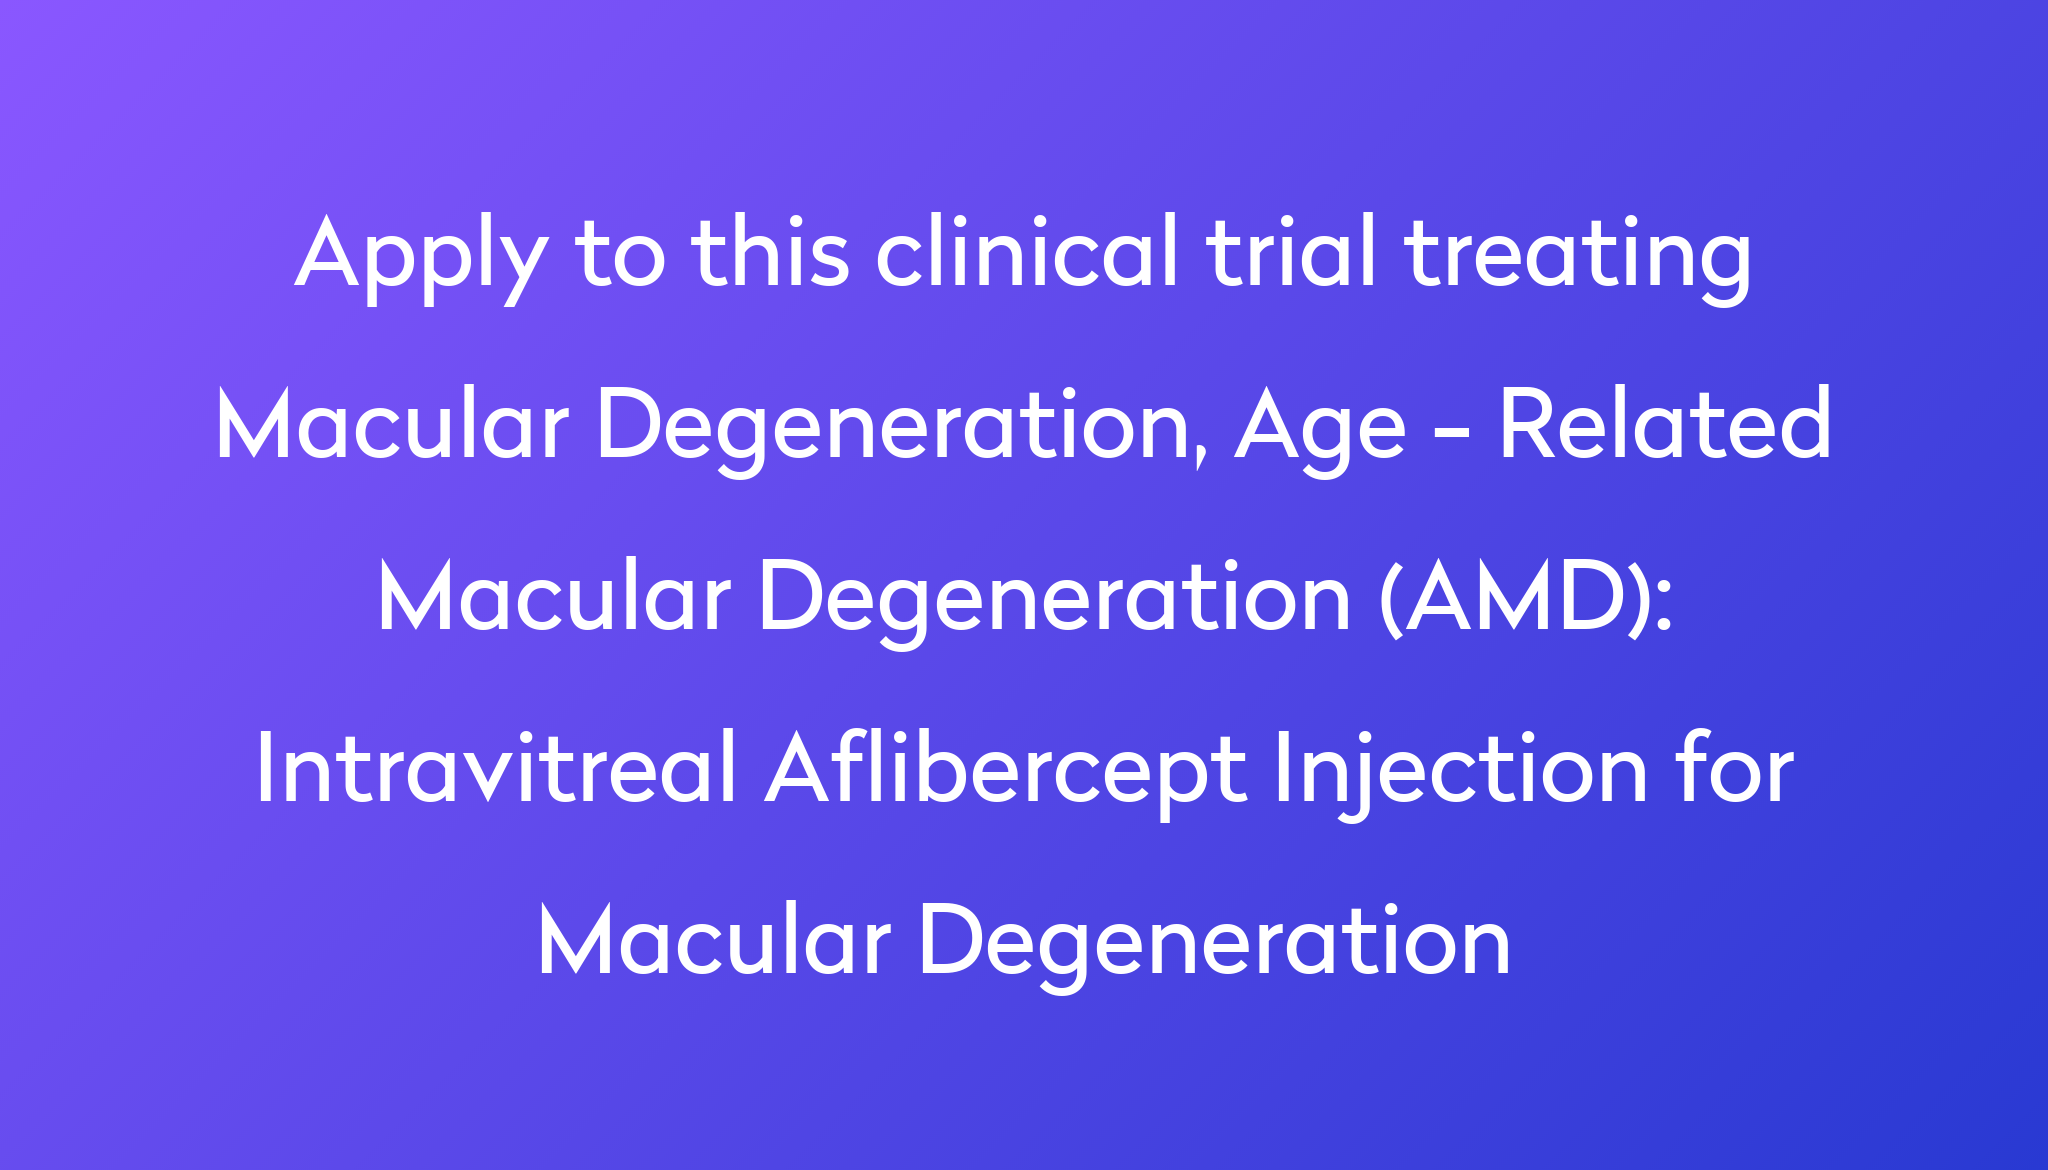 Intravitreal Aflibercept Injection For Macular Degeneration Clinical Trial 2022 Power